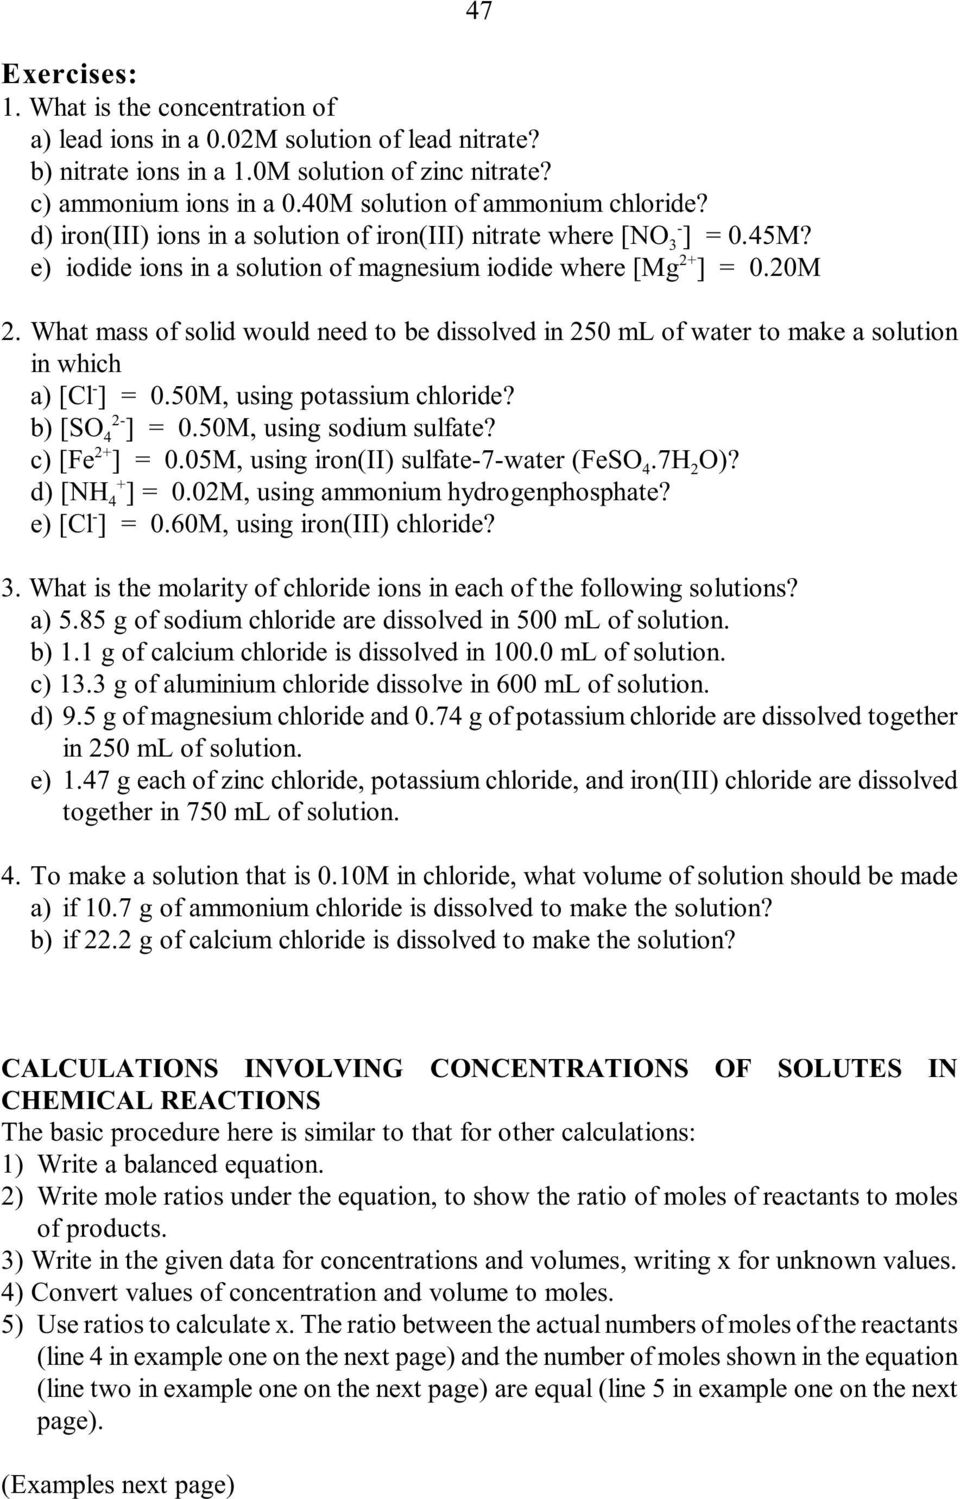 What mass of solid would need to be dissolved in 250 ml of water to make a solution in which a) [Cl ] = 0.50M, using potassium chloride? 2 b) [SO 4 ] = 0.50M, using sodium sulfate? 2+ c) [Fe ] = 0.